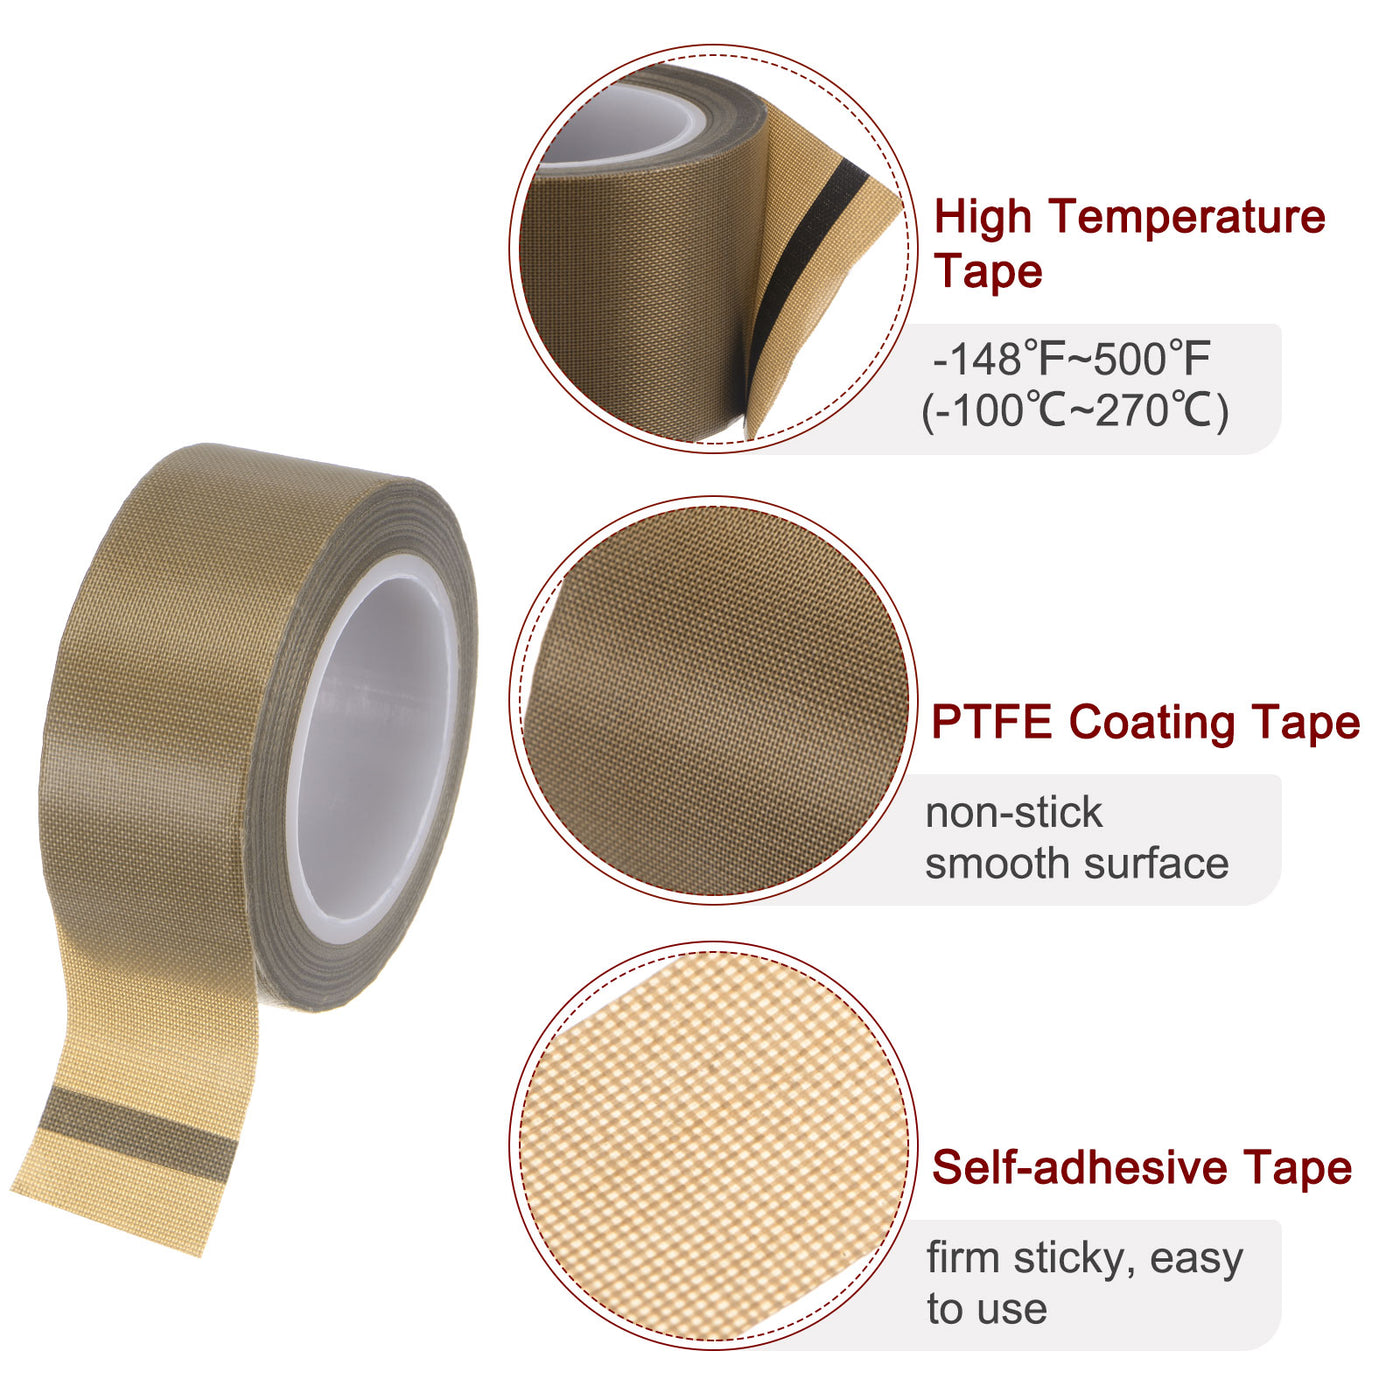 Harfington Fabric PTFE Tape 1"x33ft PTFE Adhesive Tape 0.13mm Thickness Brown